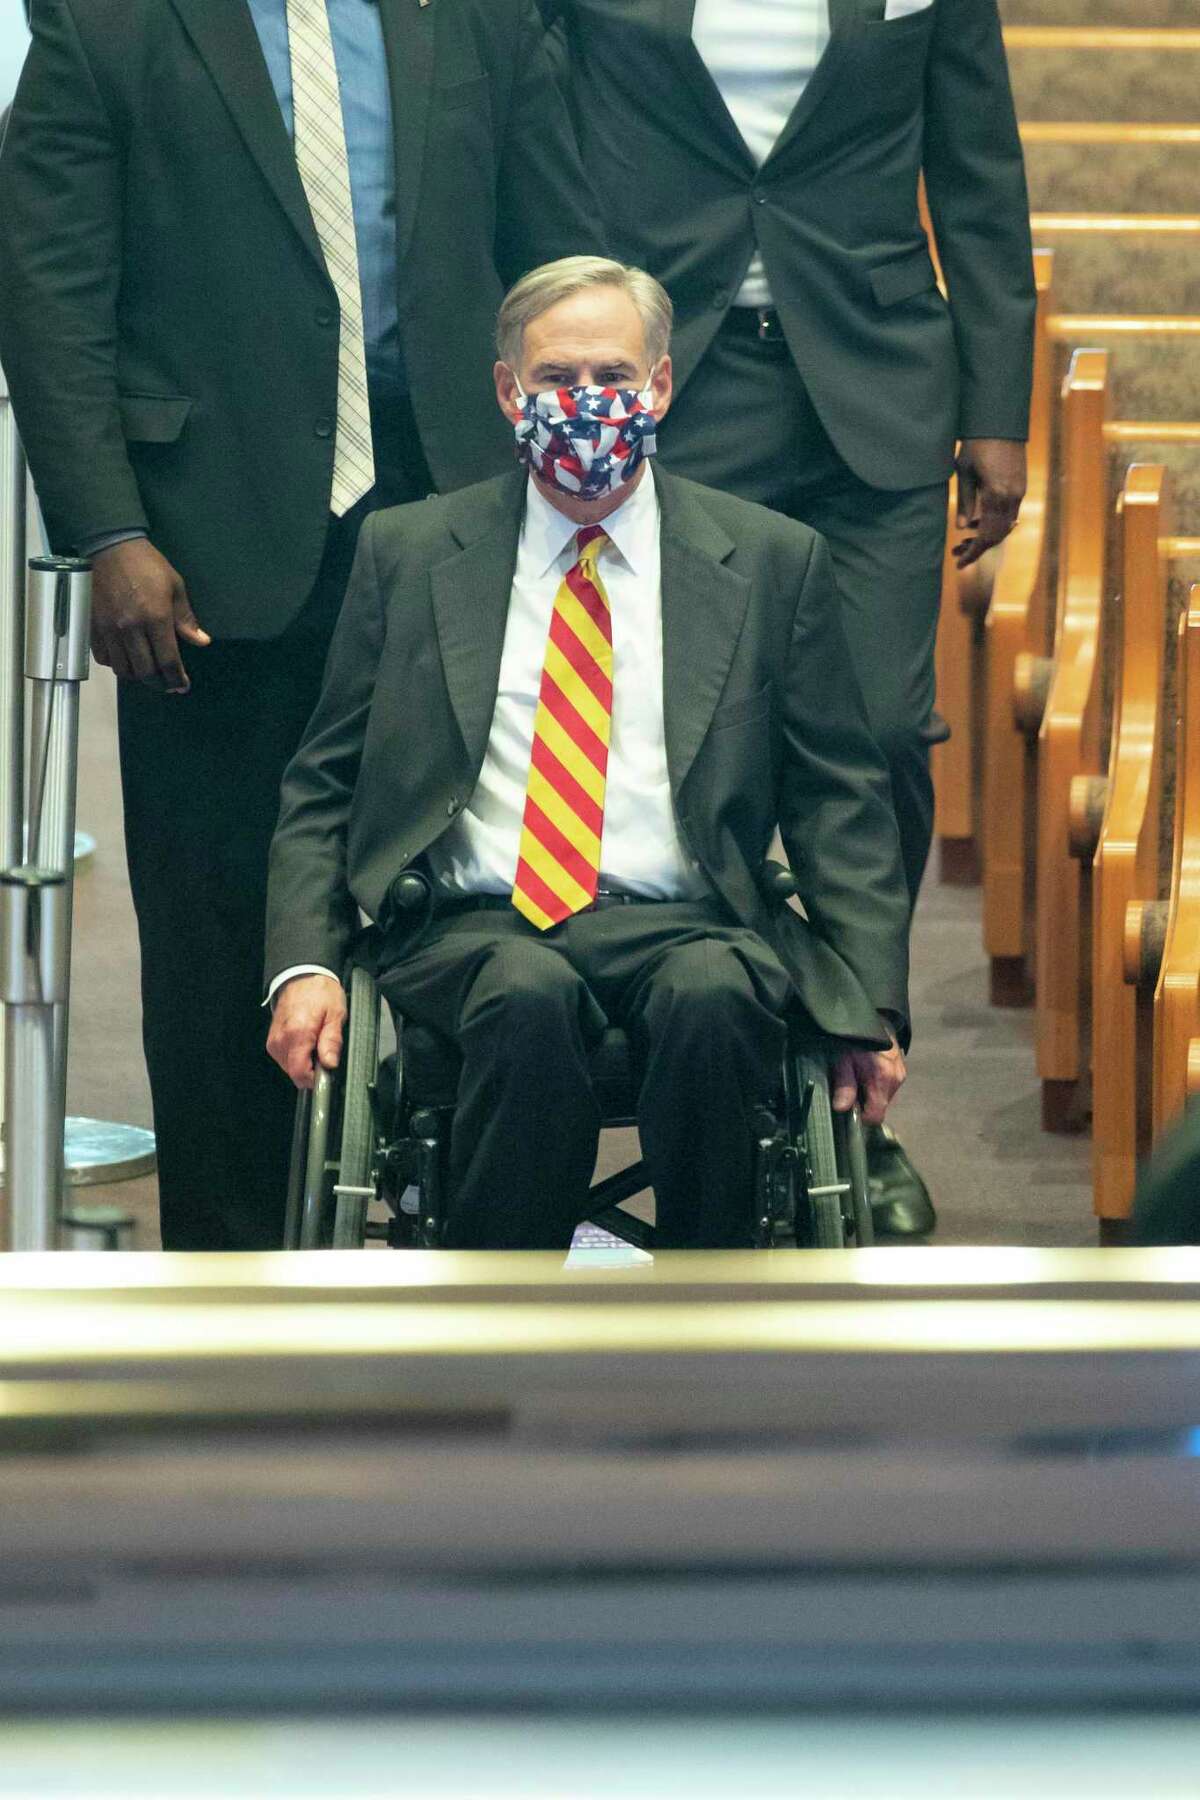 Texas Governor Greg Abbott visits the casket during a public visitation for George Floyd Monday, June 8, 2020, at The Fountain of Praise church in Houston. Floyd was killed after being restrained by Minneapolis Police officers on May 25, 2020.